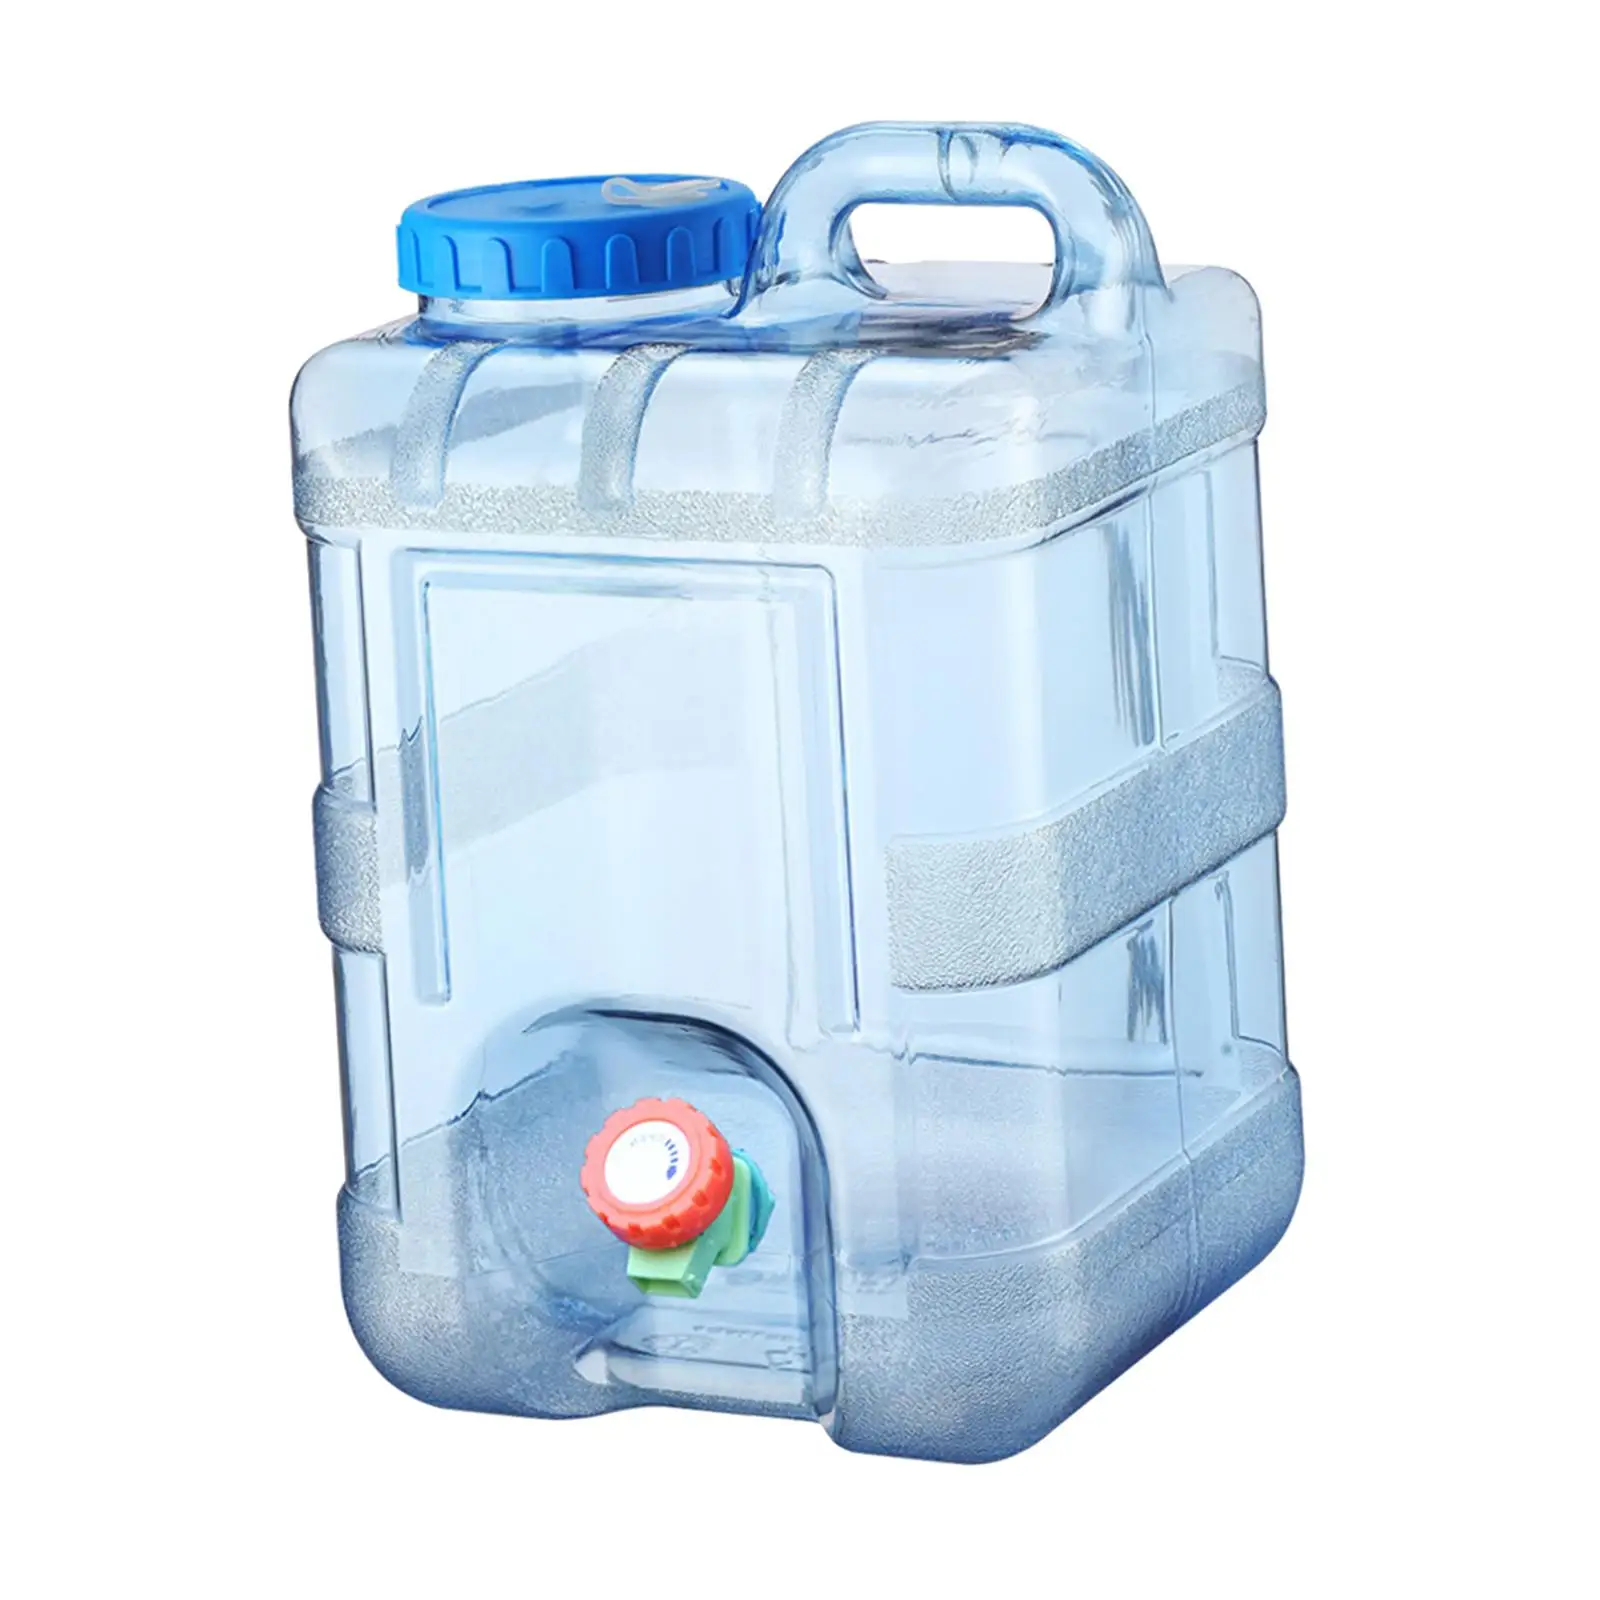 10L Capacity Water Container with Spigot Drink Dispenser Water Tank for Car